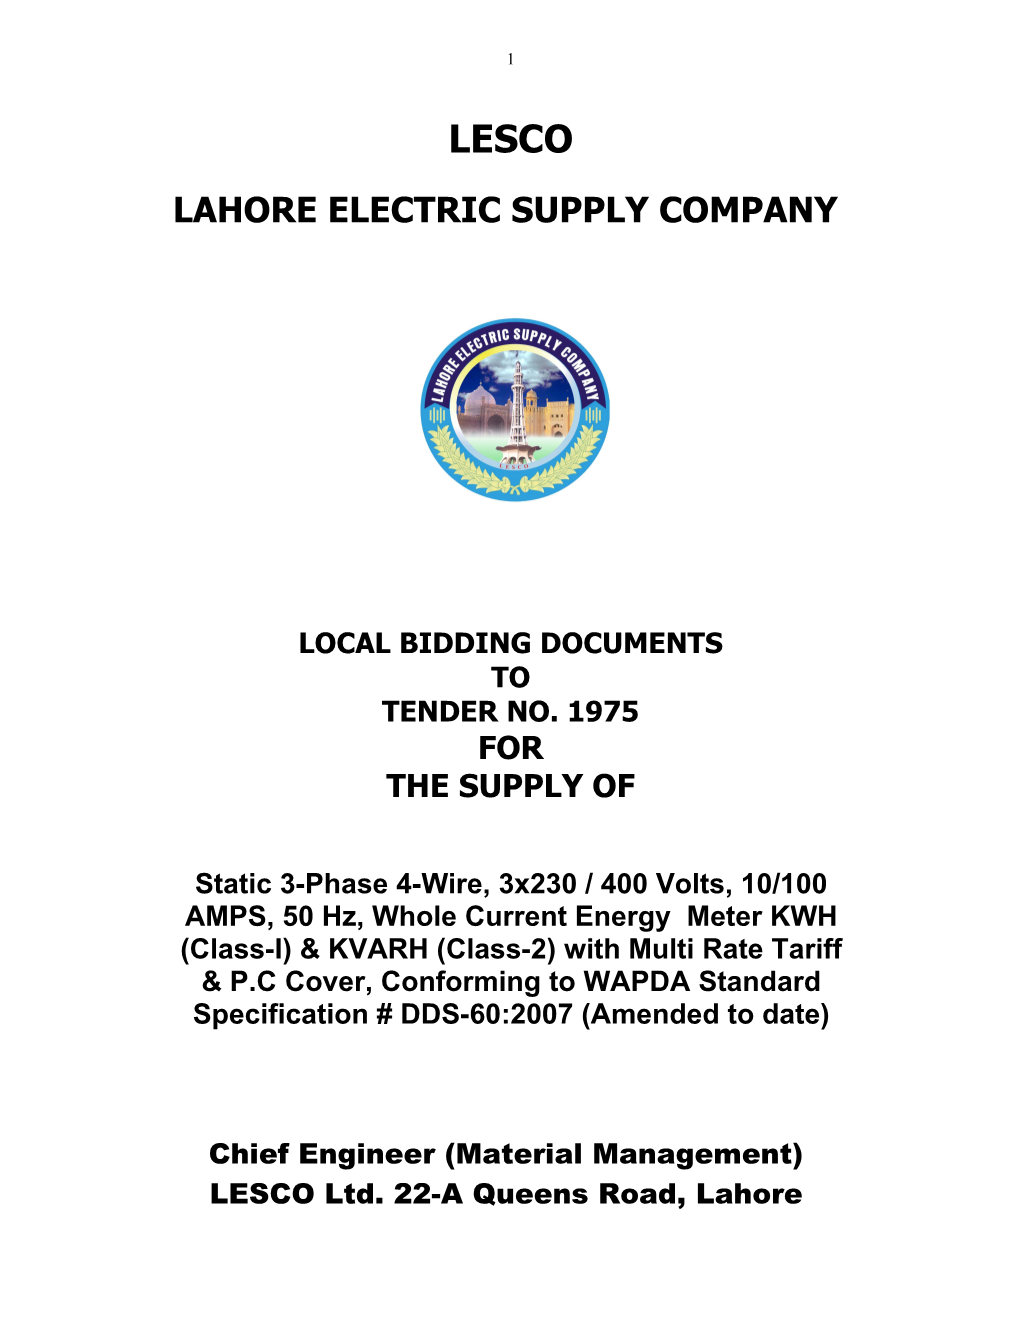 Lahore Electric Supply Company